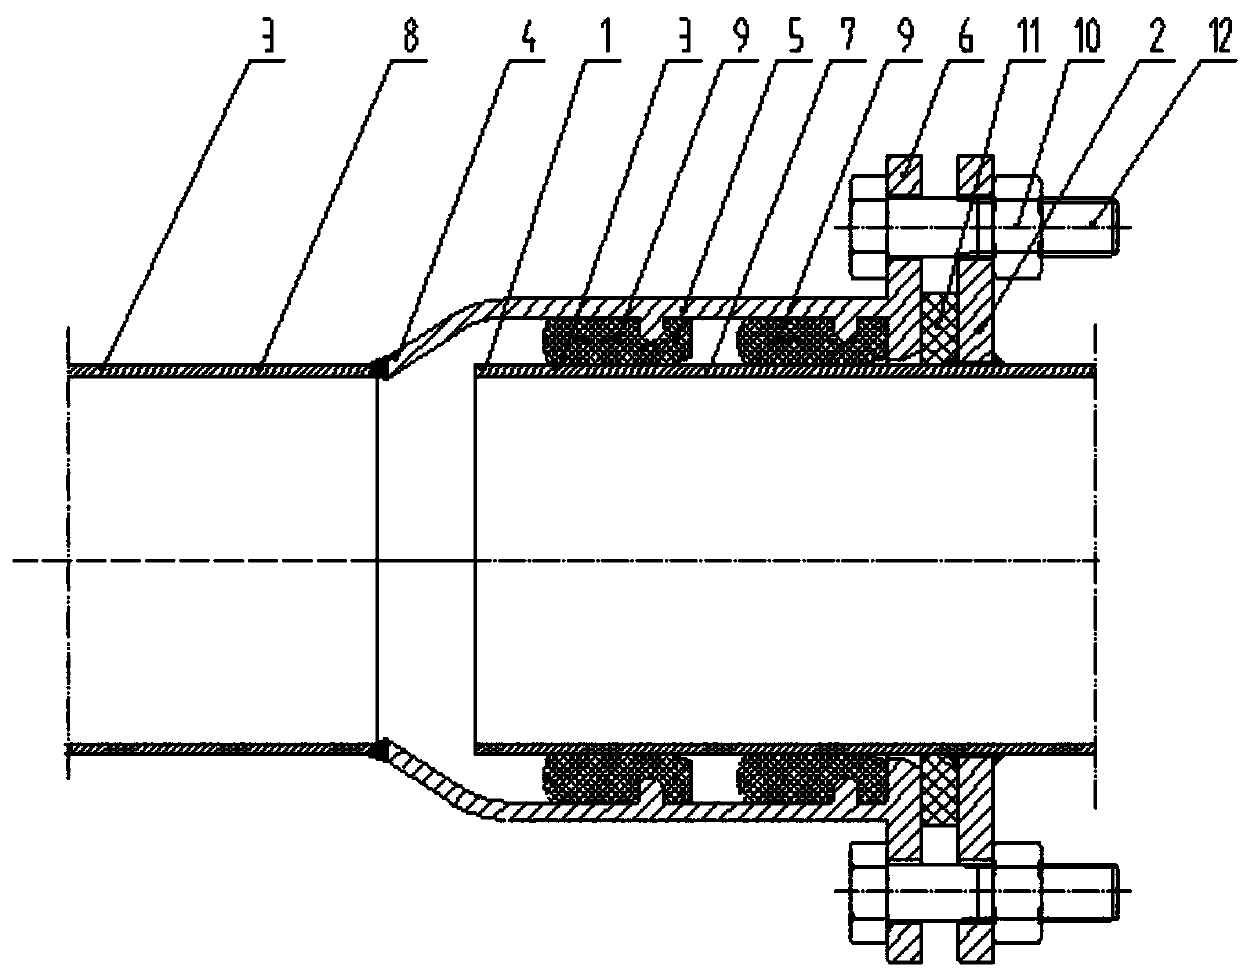 Sliding-in self-anchorage type socket connection pipe